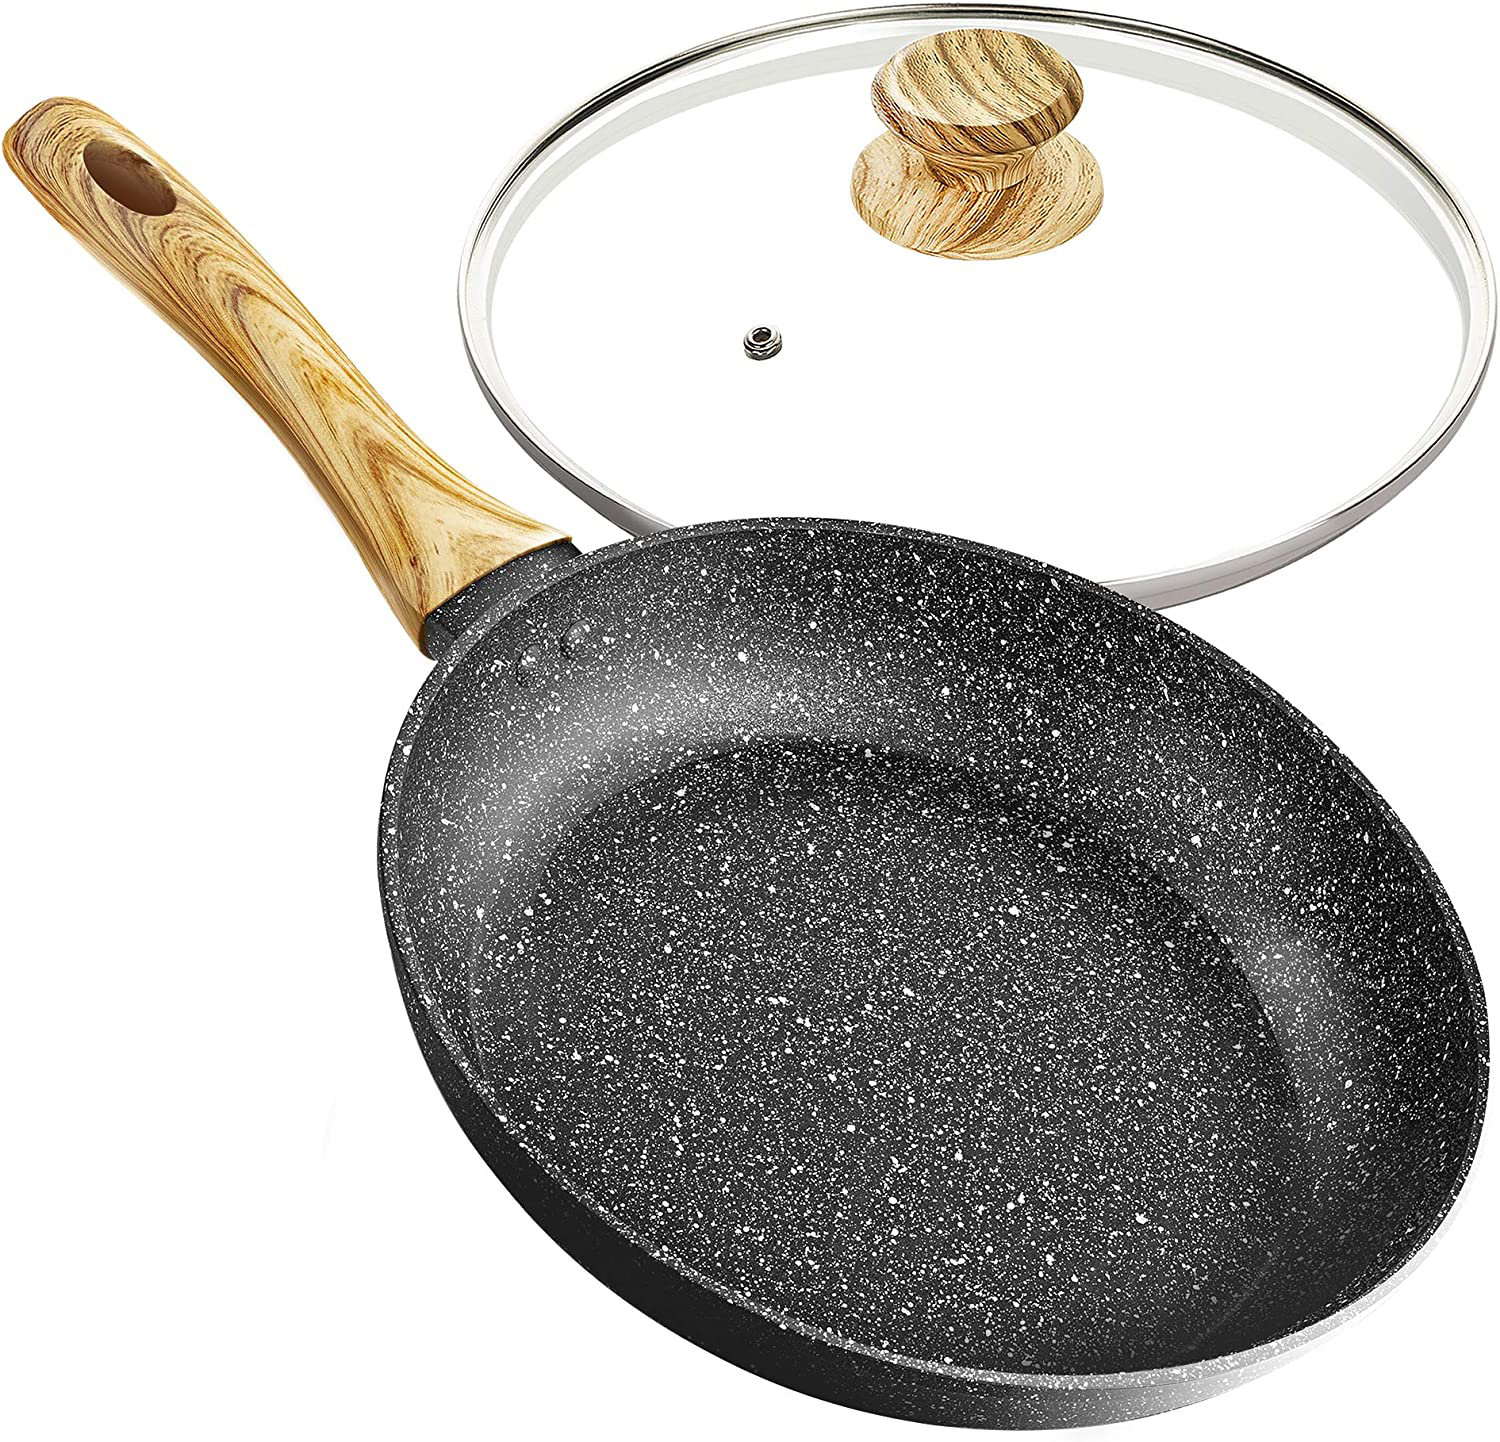 MICHELANGELO Frying Pan Set, 9.5 & 11 Nonstick Frying Pans with  Stone-Derived Coating, Nonstick Pans Set, Stone Skillets Nonstick, Stone  Pans, Stone Frying Pans, Induction Compatible, 9.5 & 11 